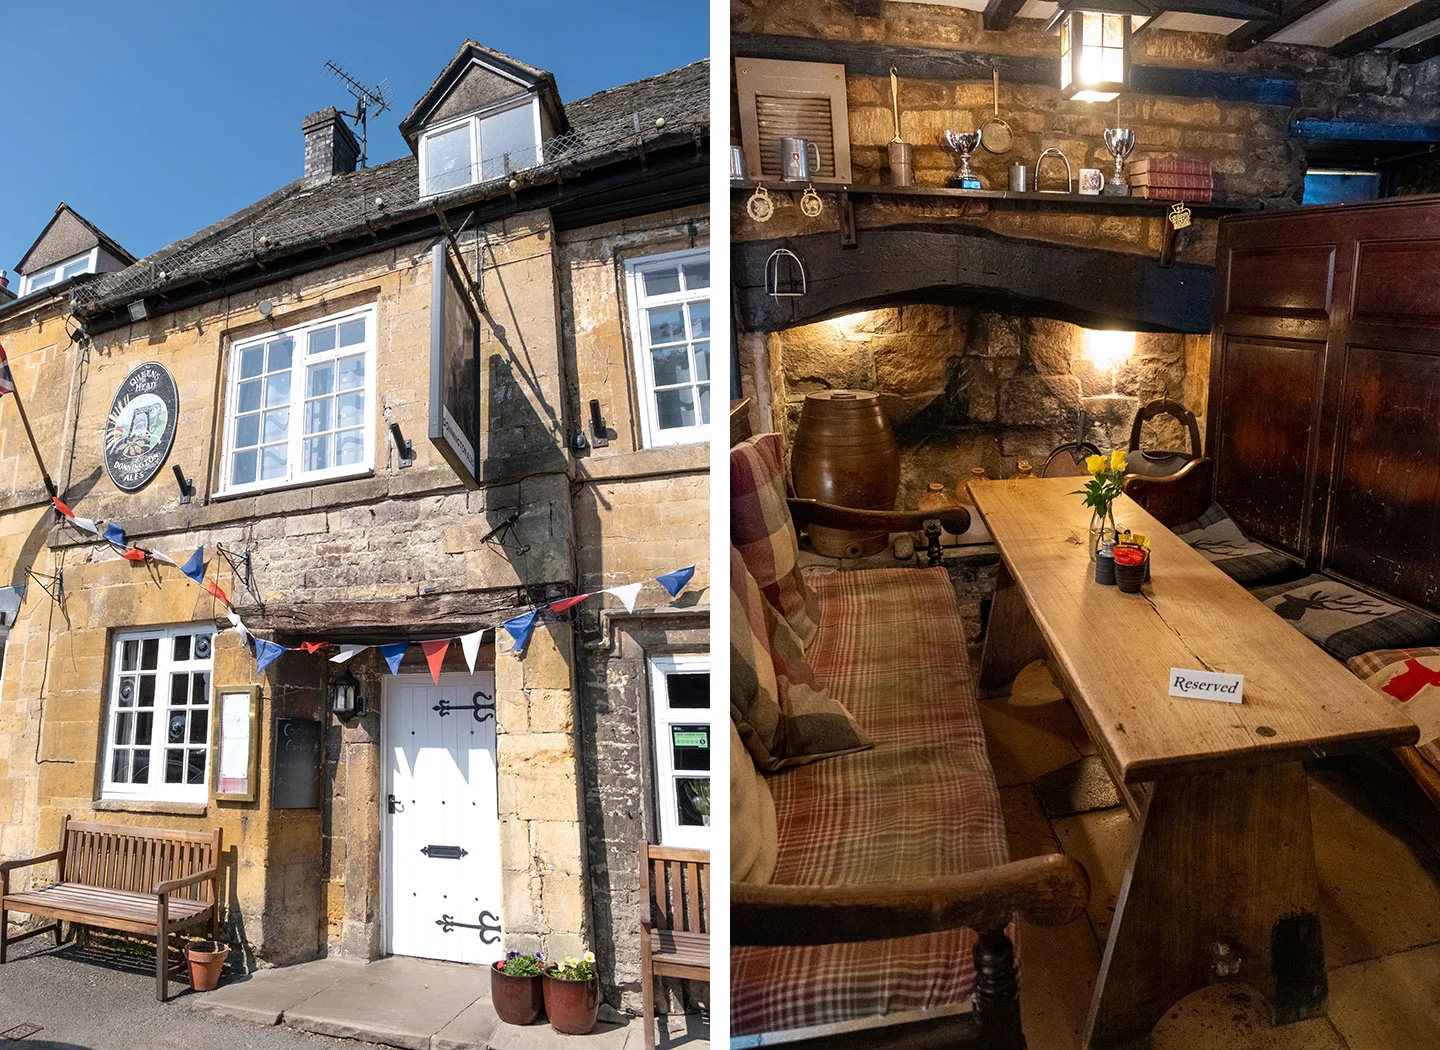 The Queen's Head pub in Stow-on-the-Wold